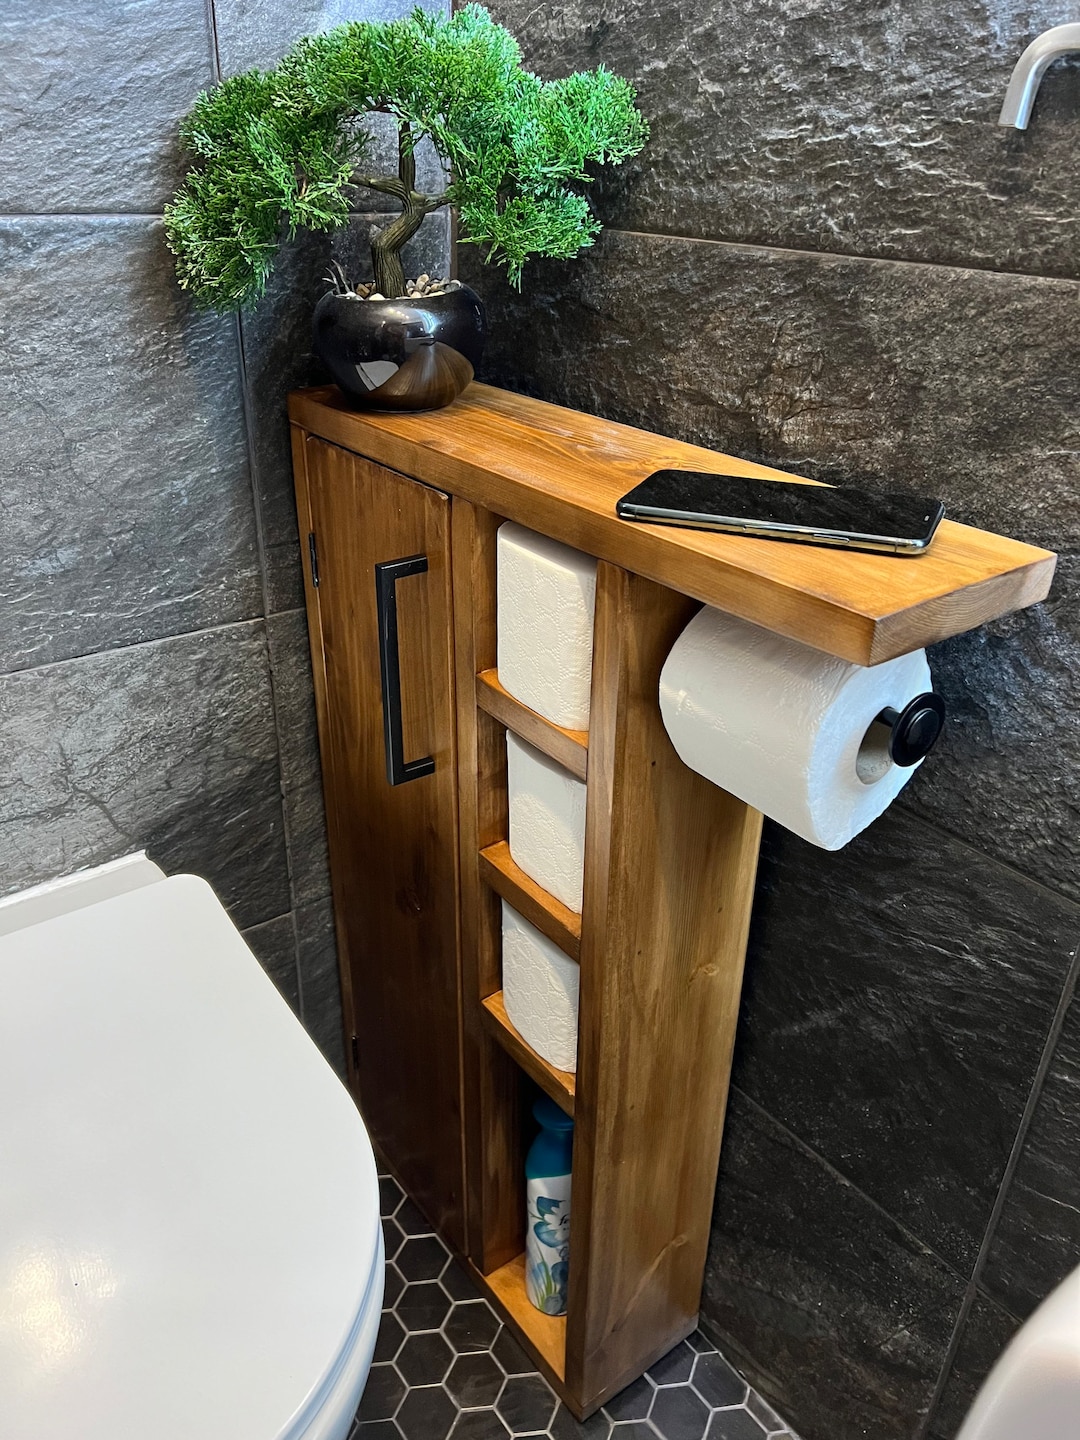 Barn Wood Toilet Paper Holder, Rustic Toilet Paper Hanger With